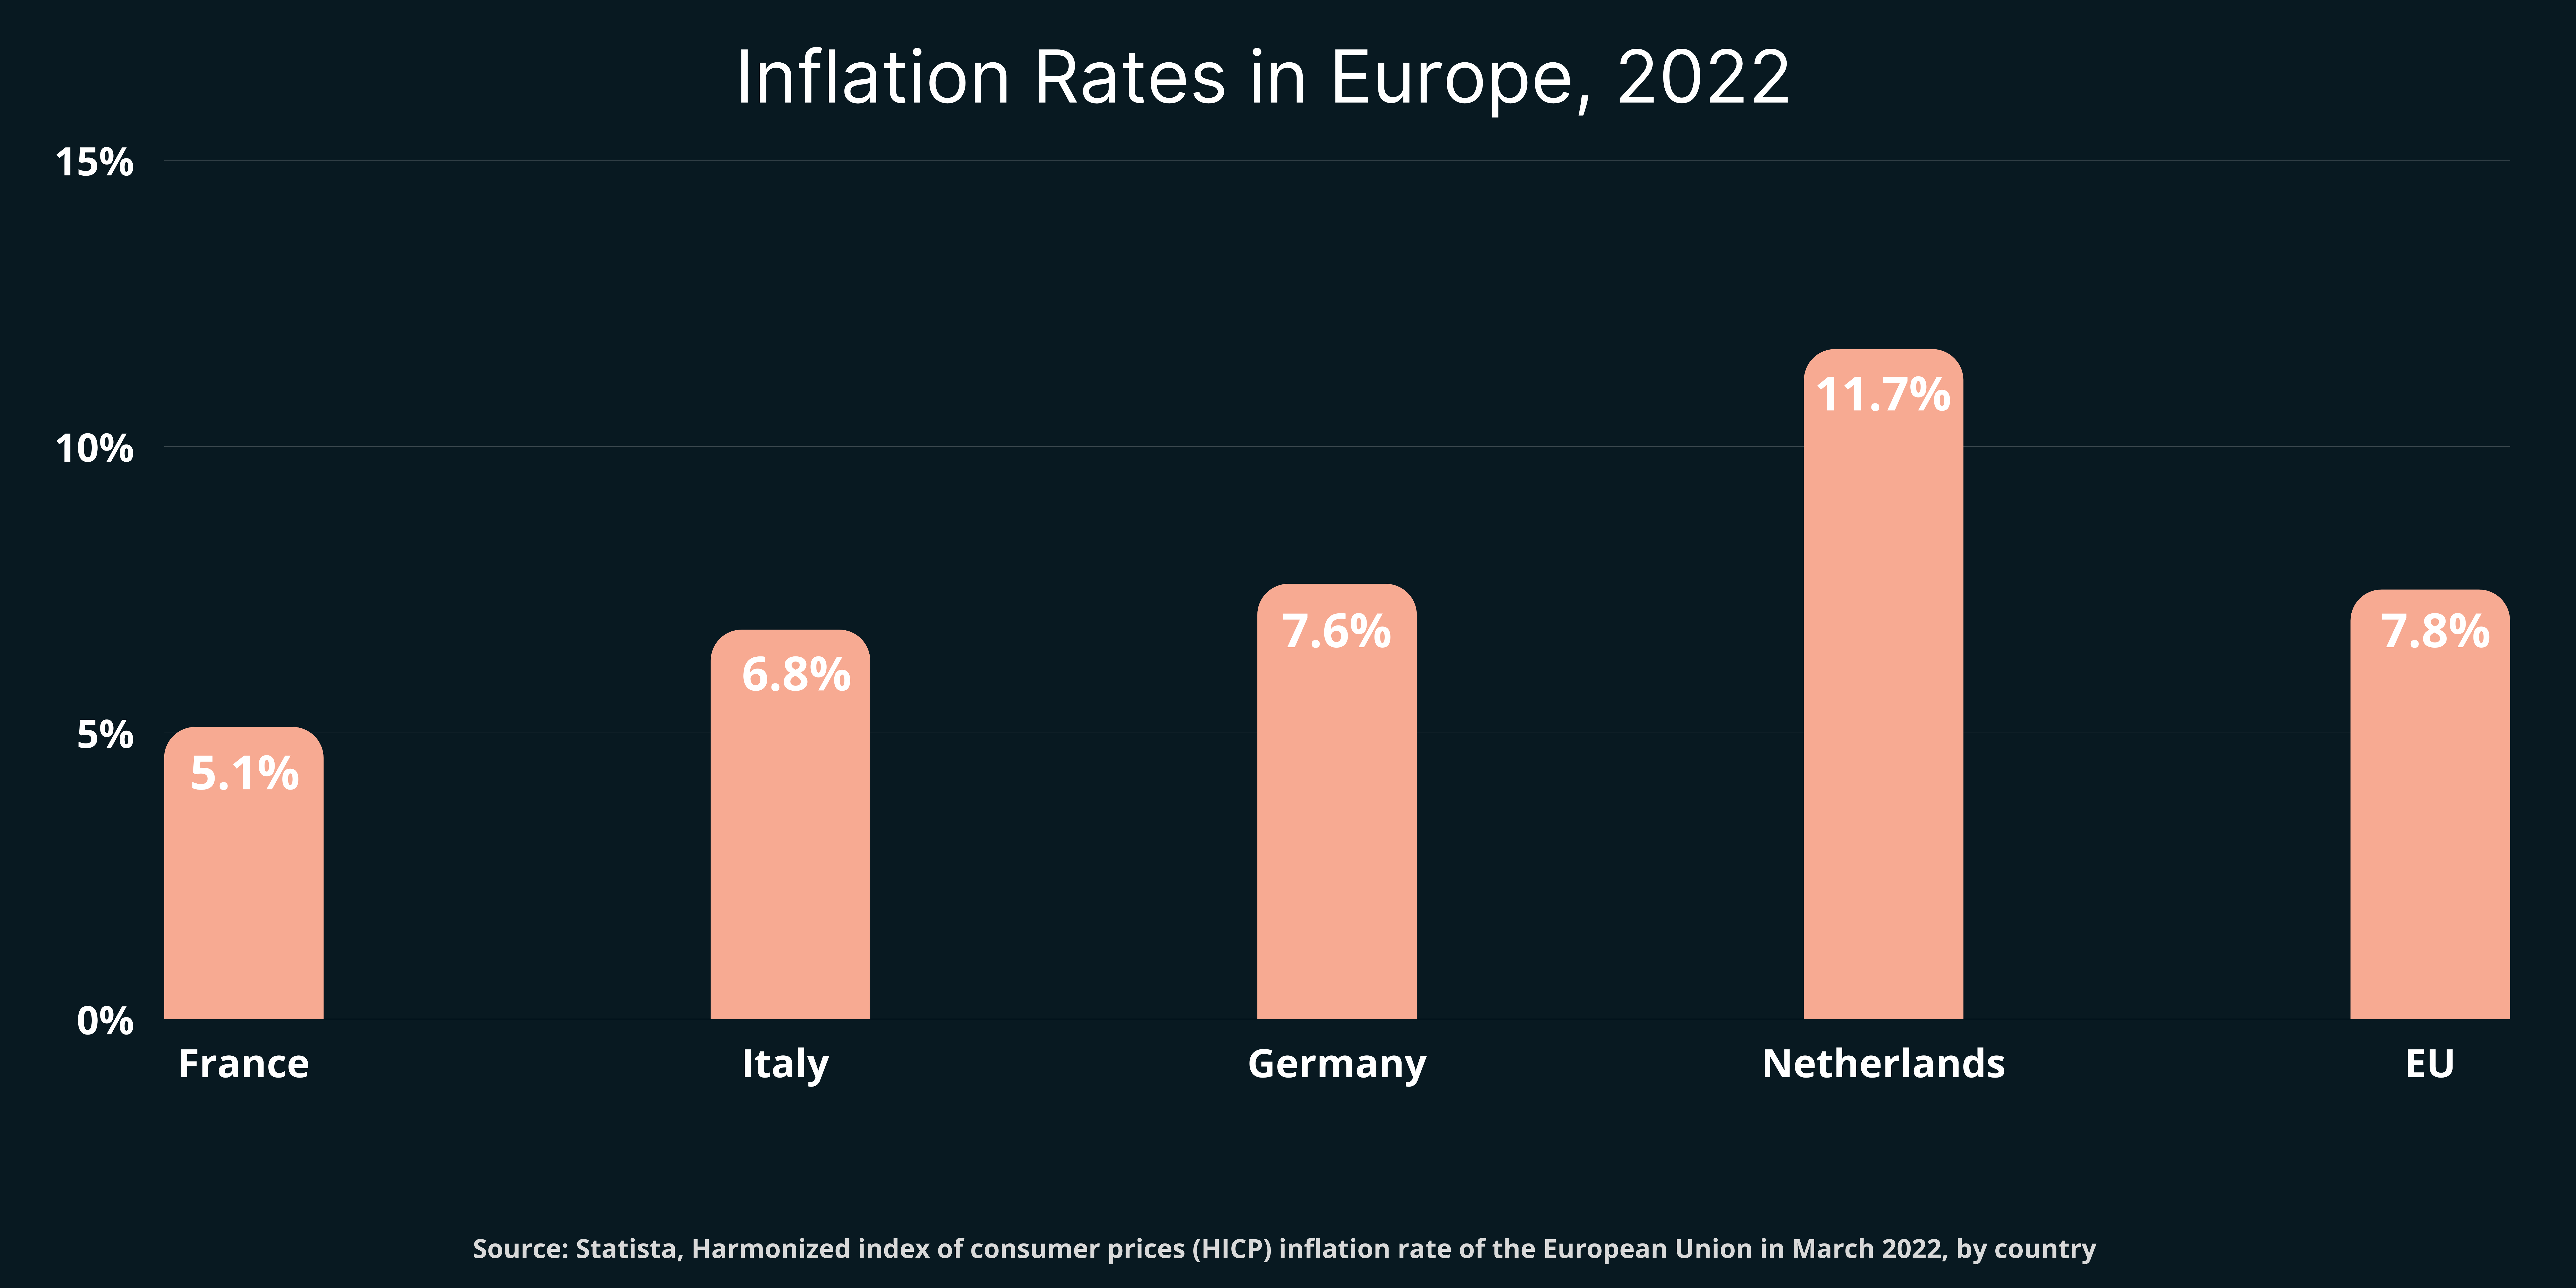 Inflation rates in Europe, investing to hedge against inflation